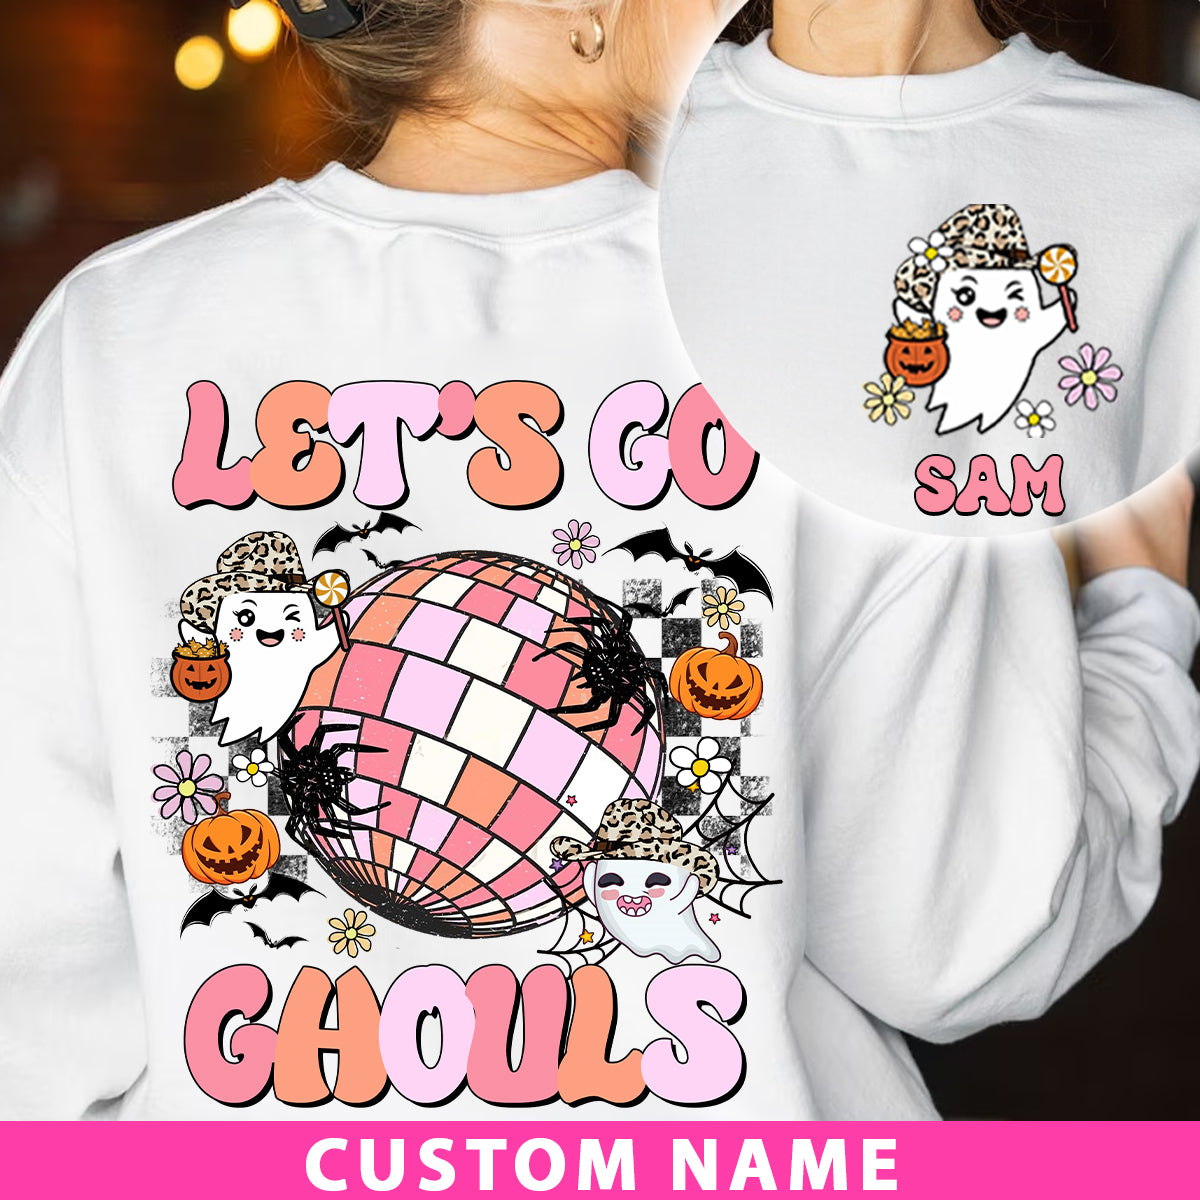 Let's Go Ghouls- Custom Name - Personalized 2 Side Sweatshirt - Halloween Family Gift